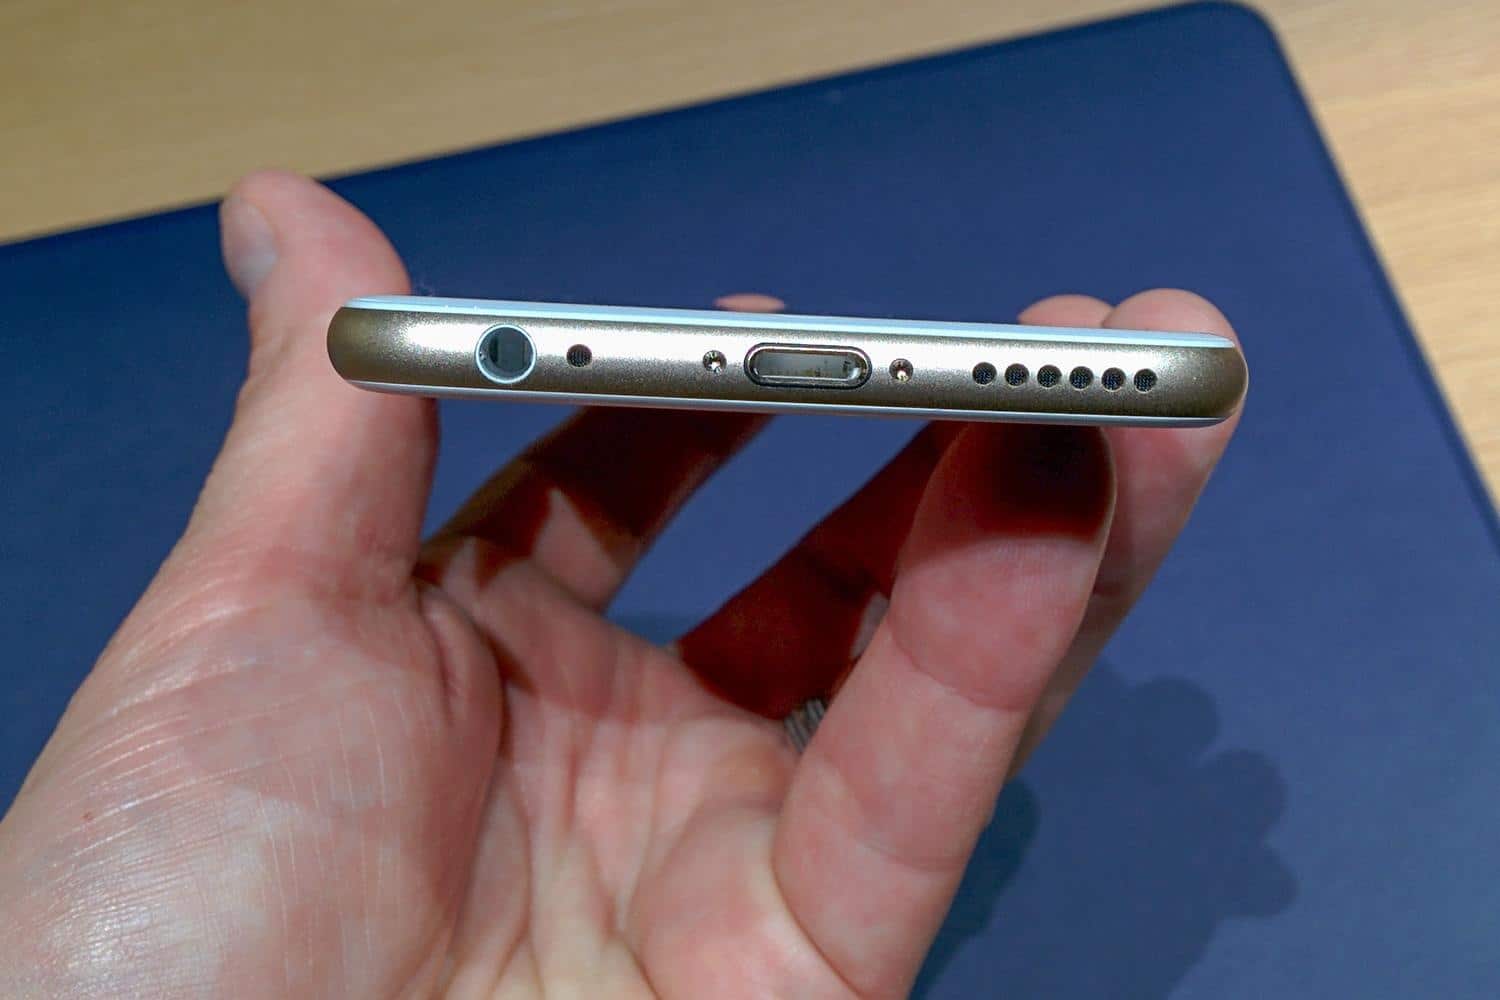 apple-iphone-6-hands-on-19-1500x1000